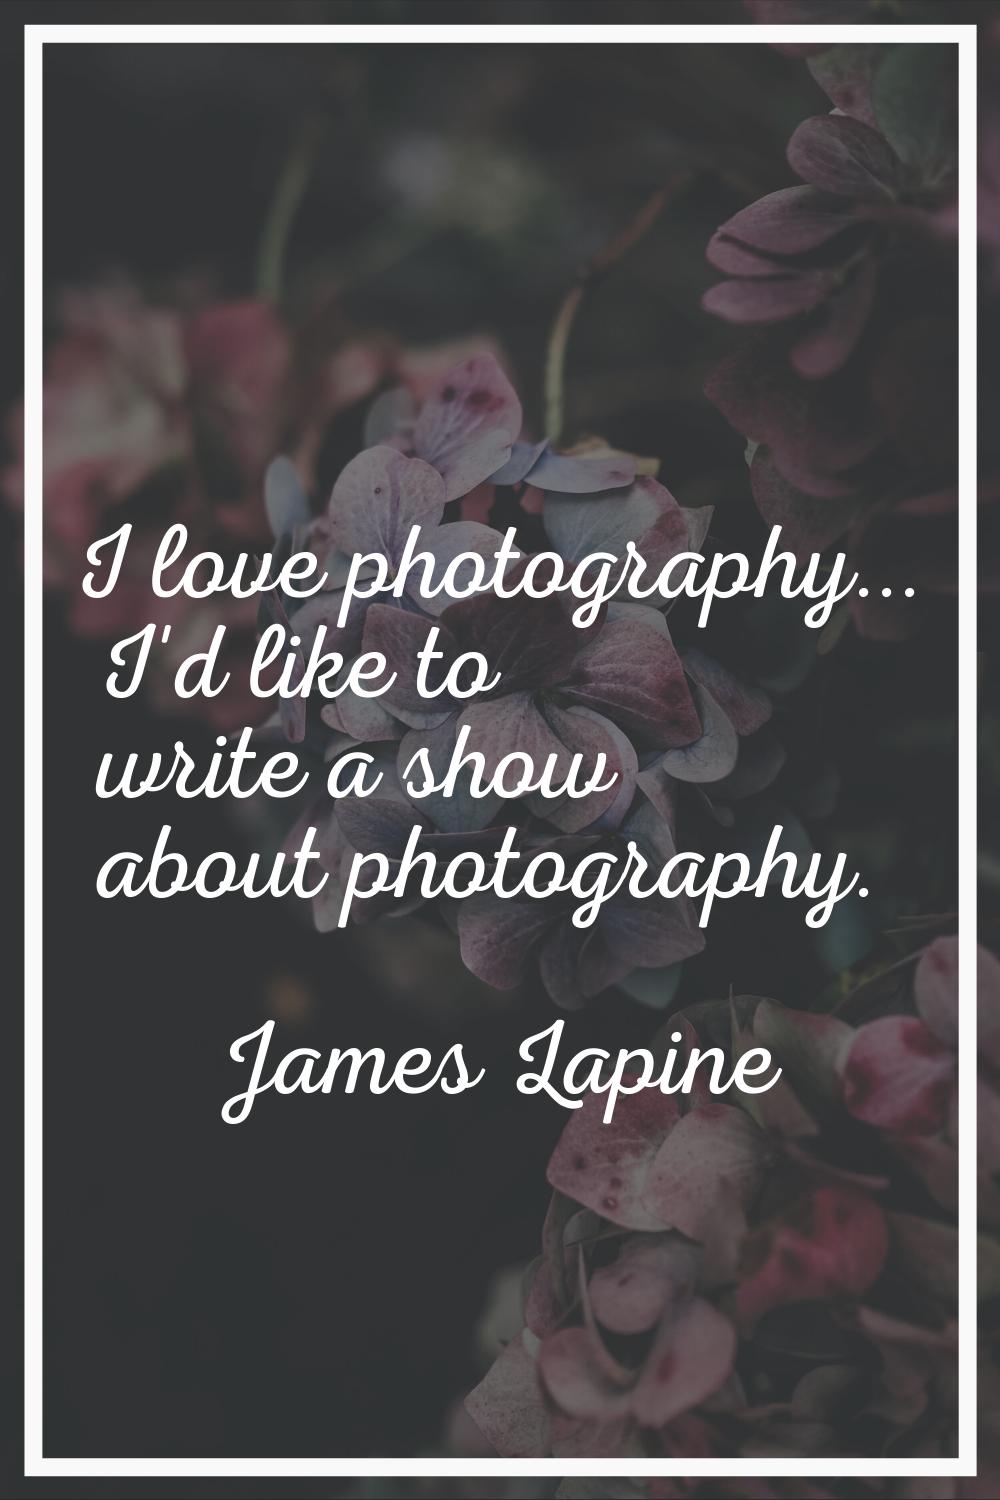 I love photography... I'd like to write a show about photography.